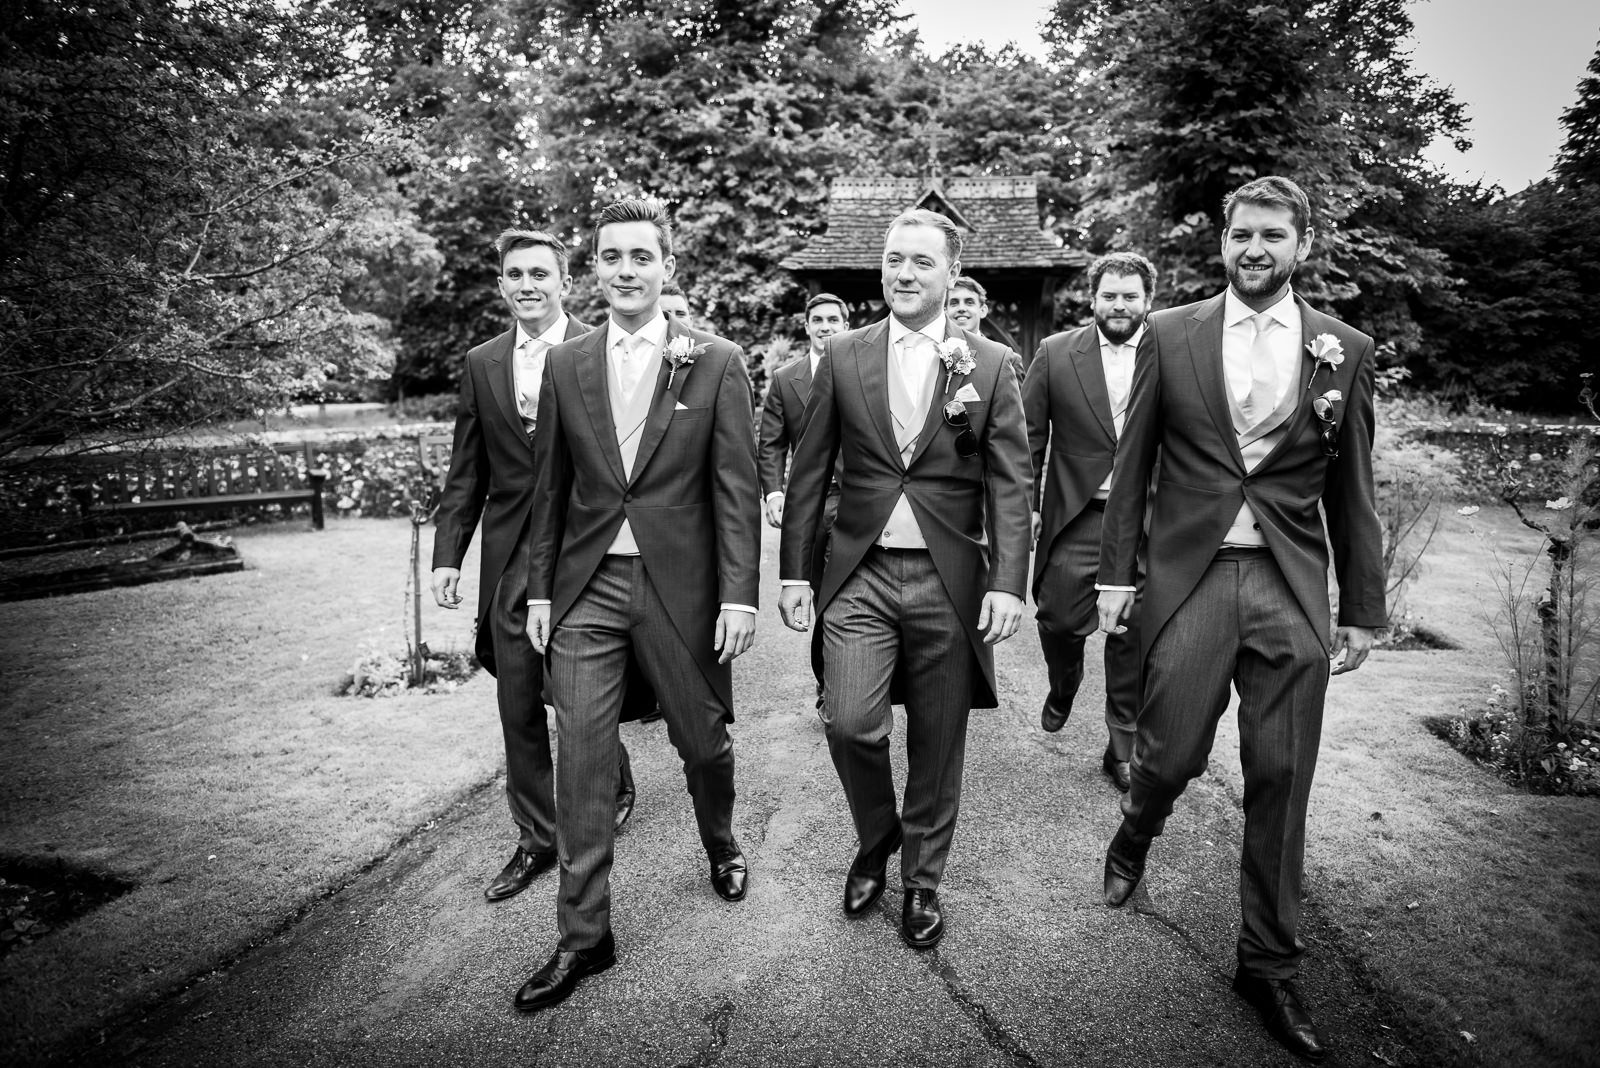 Black and white documentary image of the groom and his grooms party walking to church.